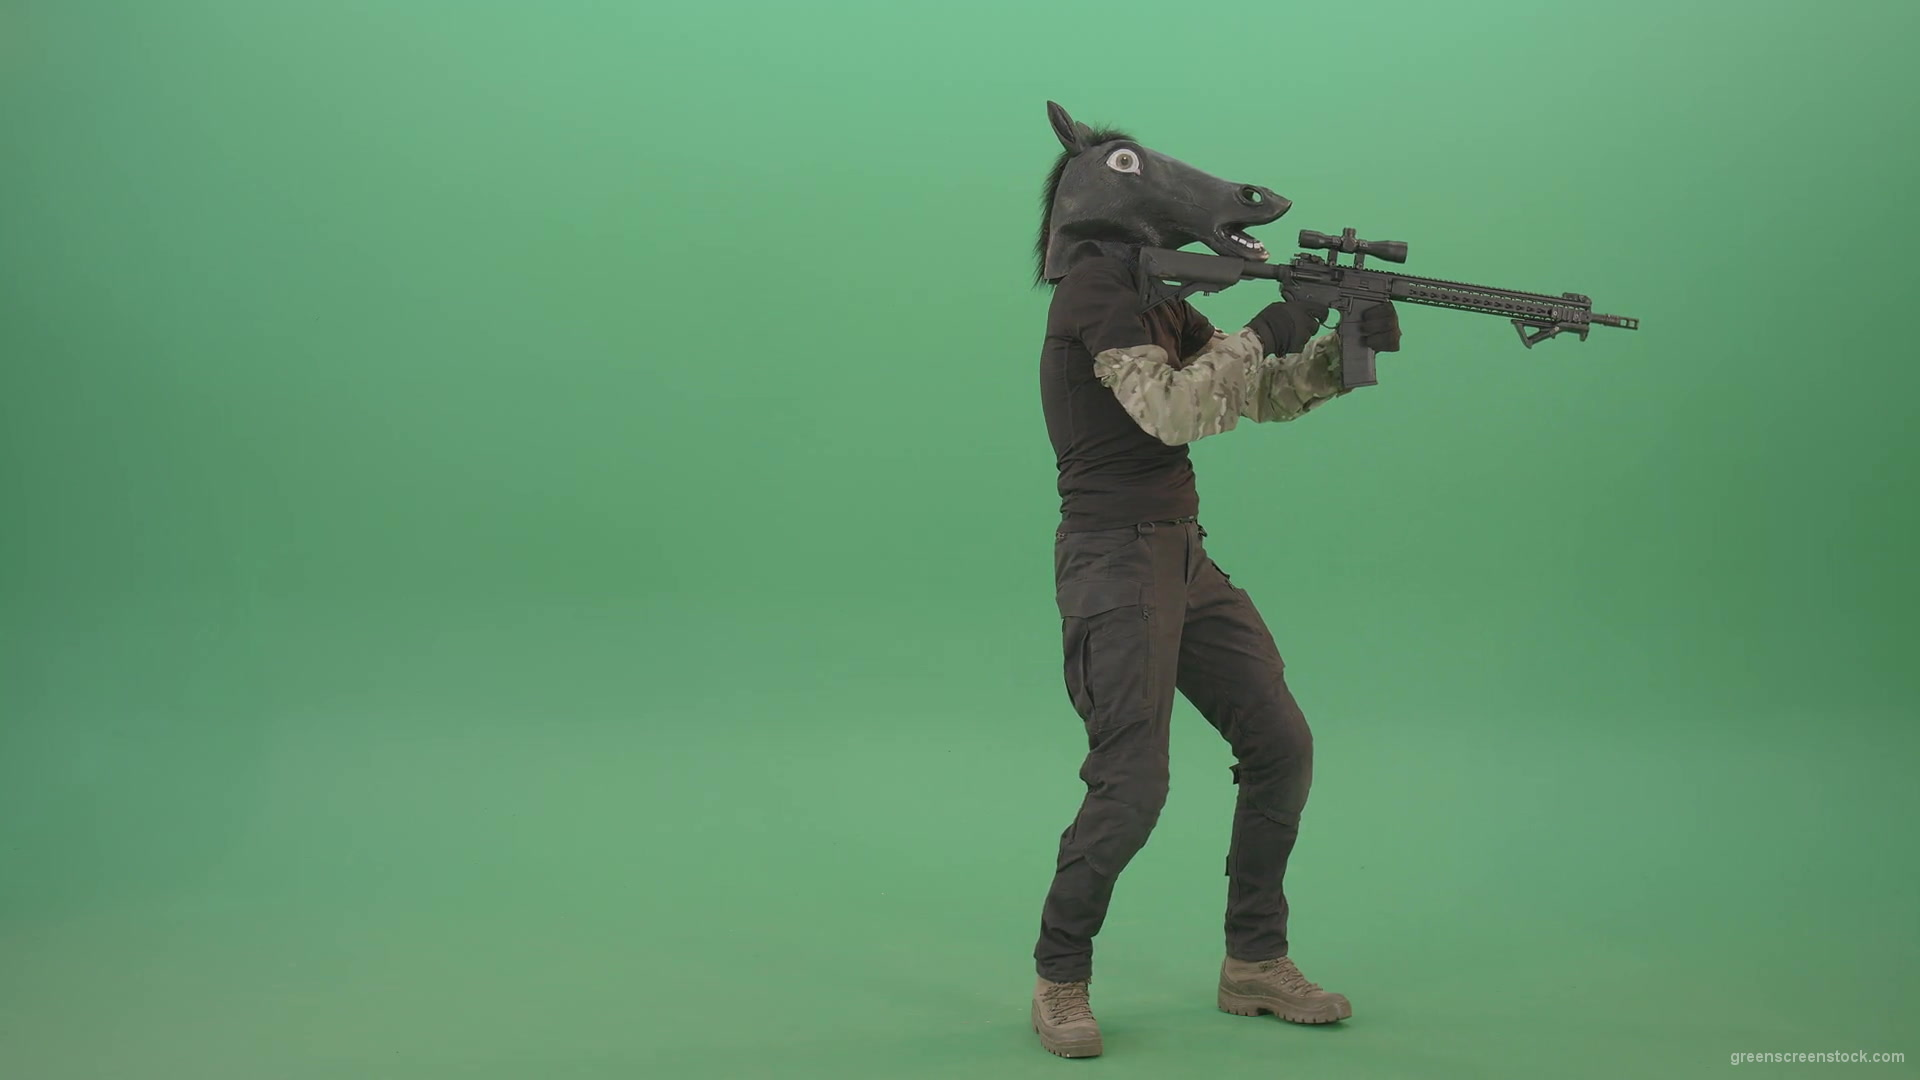 Front-view-Army-Man-in-horse-mask-shooting-from-Machine-Gun-isolated-on-Chromakey-Green-Screen-4K-Video-Footage-1920_006 Green Screen Stock